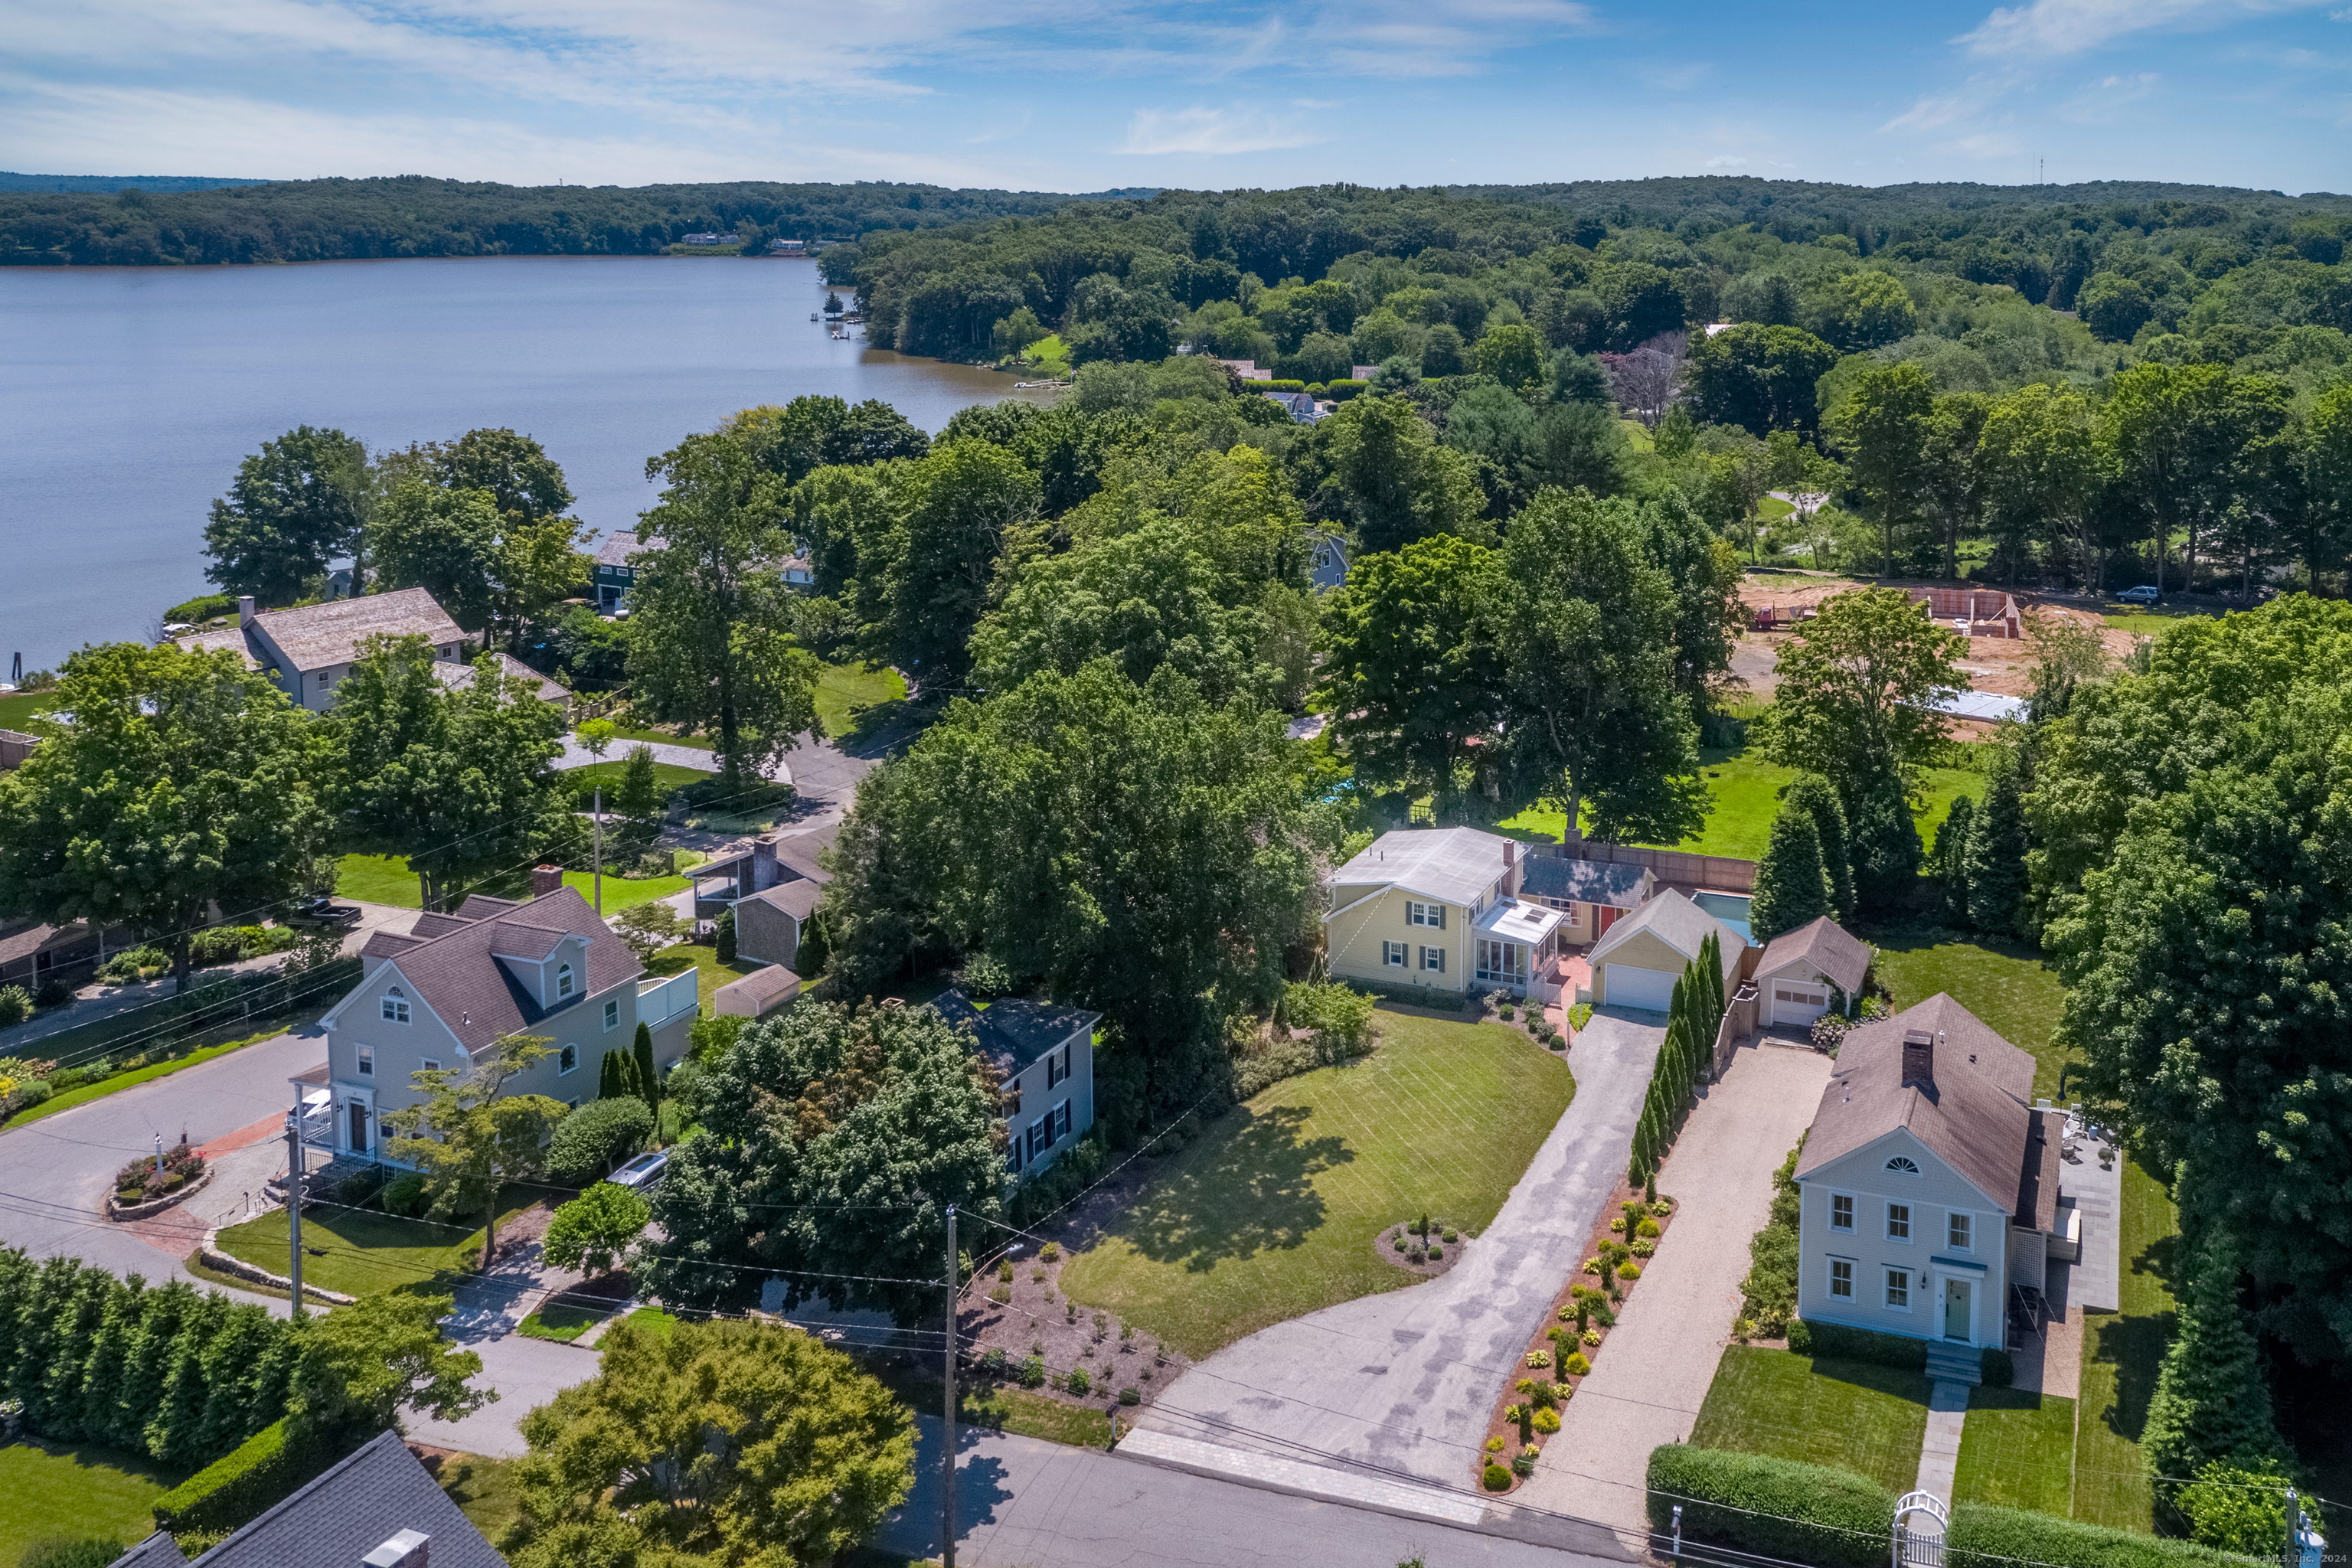 Property for Sale at 8 Mack Lane, Essex, Connecticut - Bedrooms: 4 
Bathrooms: 3 
Rooms: 7  - $795,000